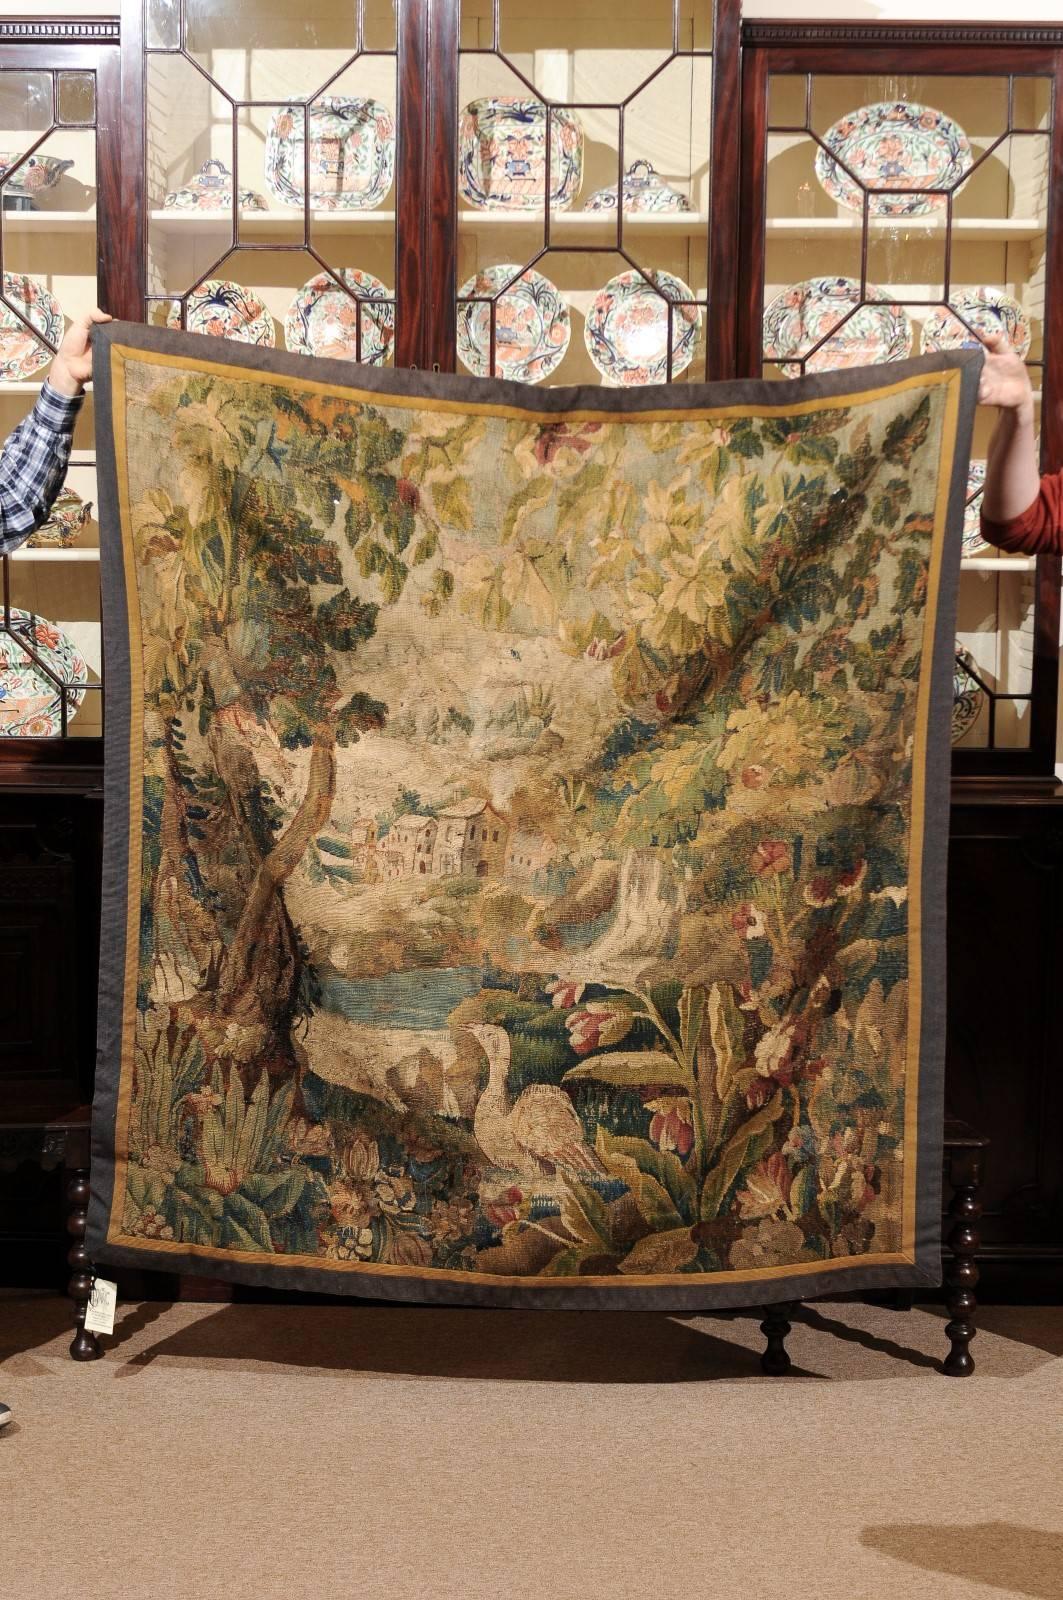 Aubusson French tapestry of village through the trees with bird, flowers and pond. The hues in soft green, blue, rose, tan and cream.